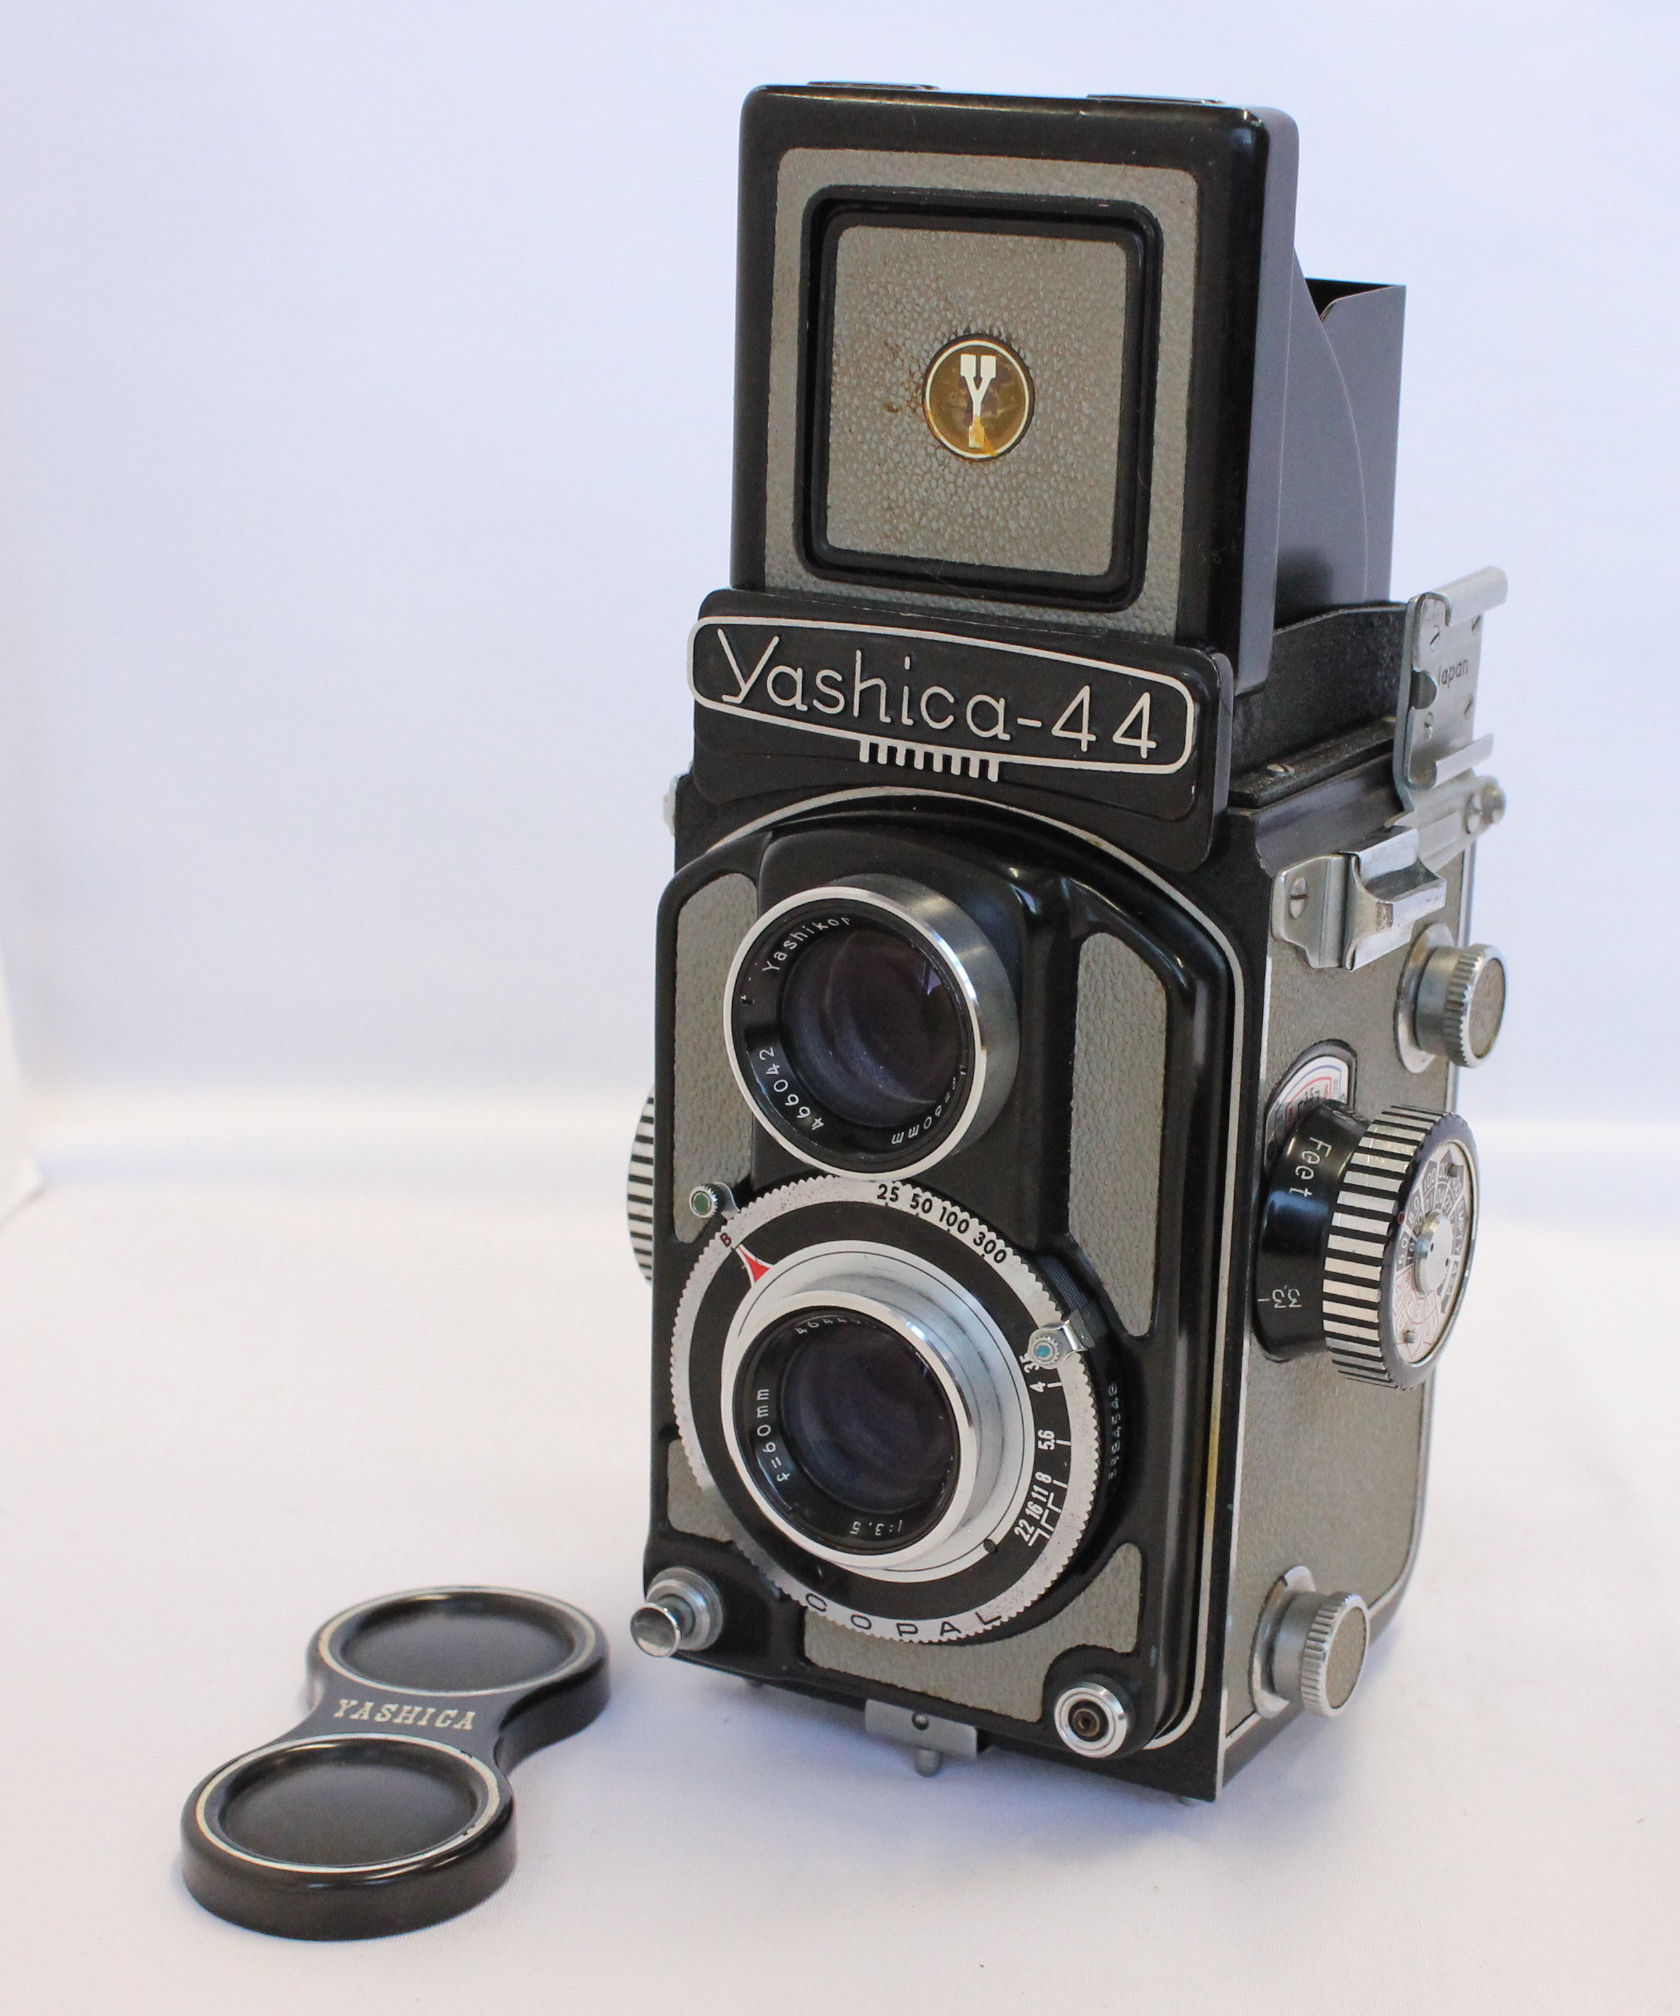   Yashica 44 A 127 4x4 TLR Camera w/ Yashikor 60mm F3.5 Lens from Japan Photo 1